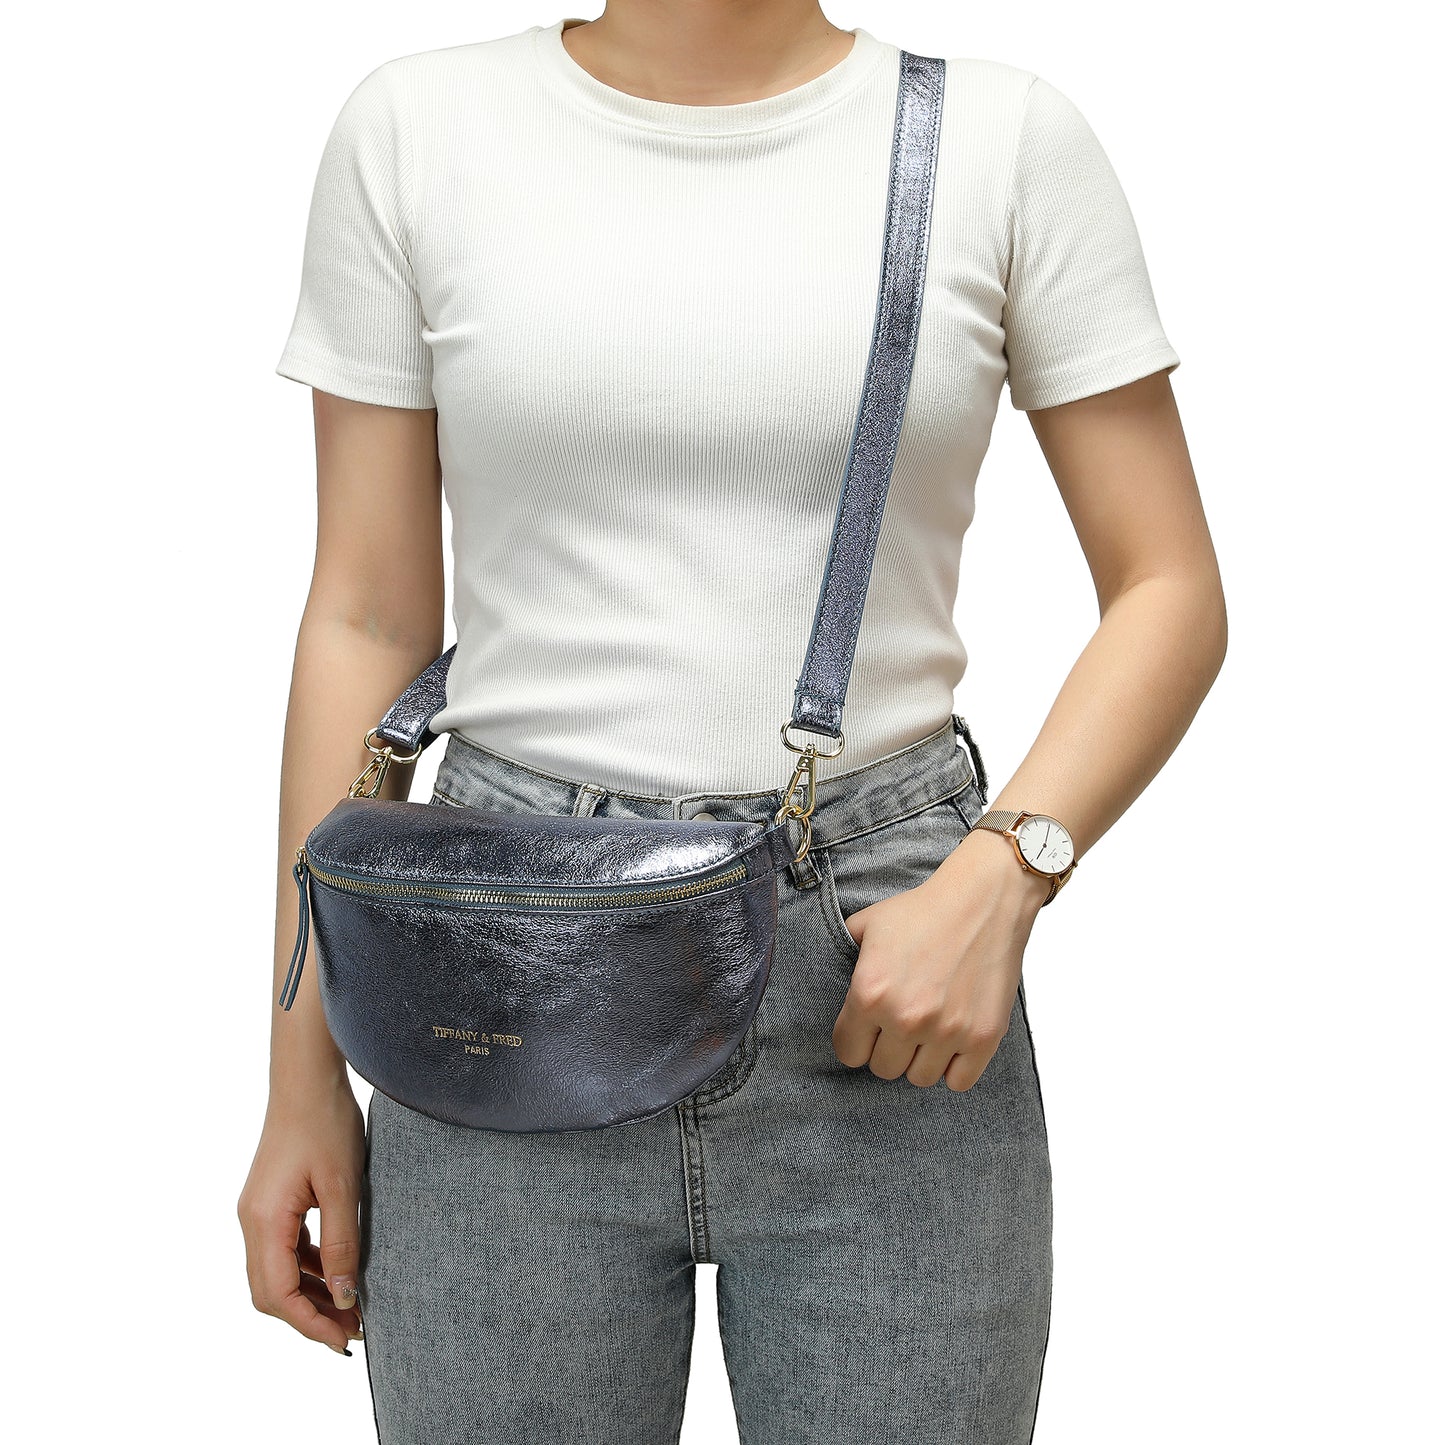 Soft-Leather Fanny-Pack